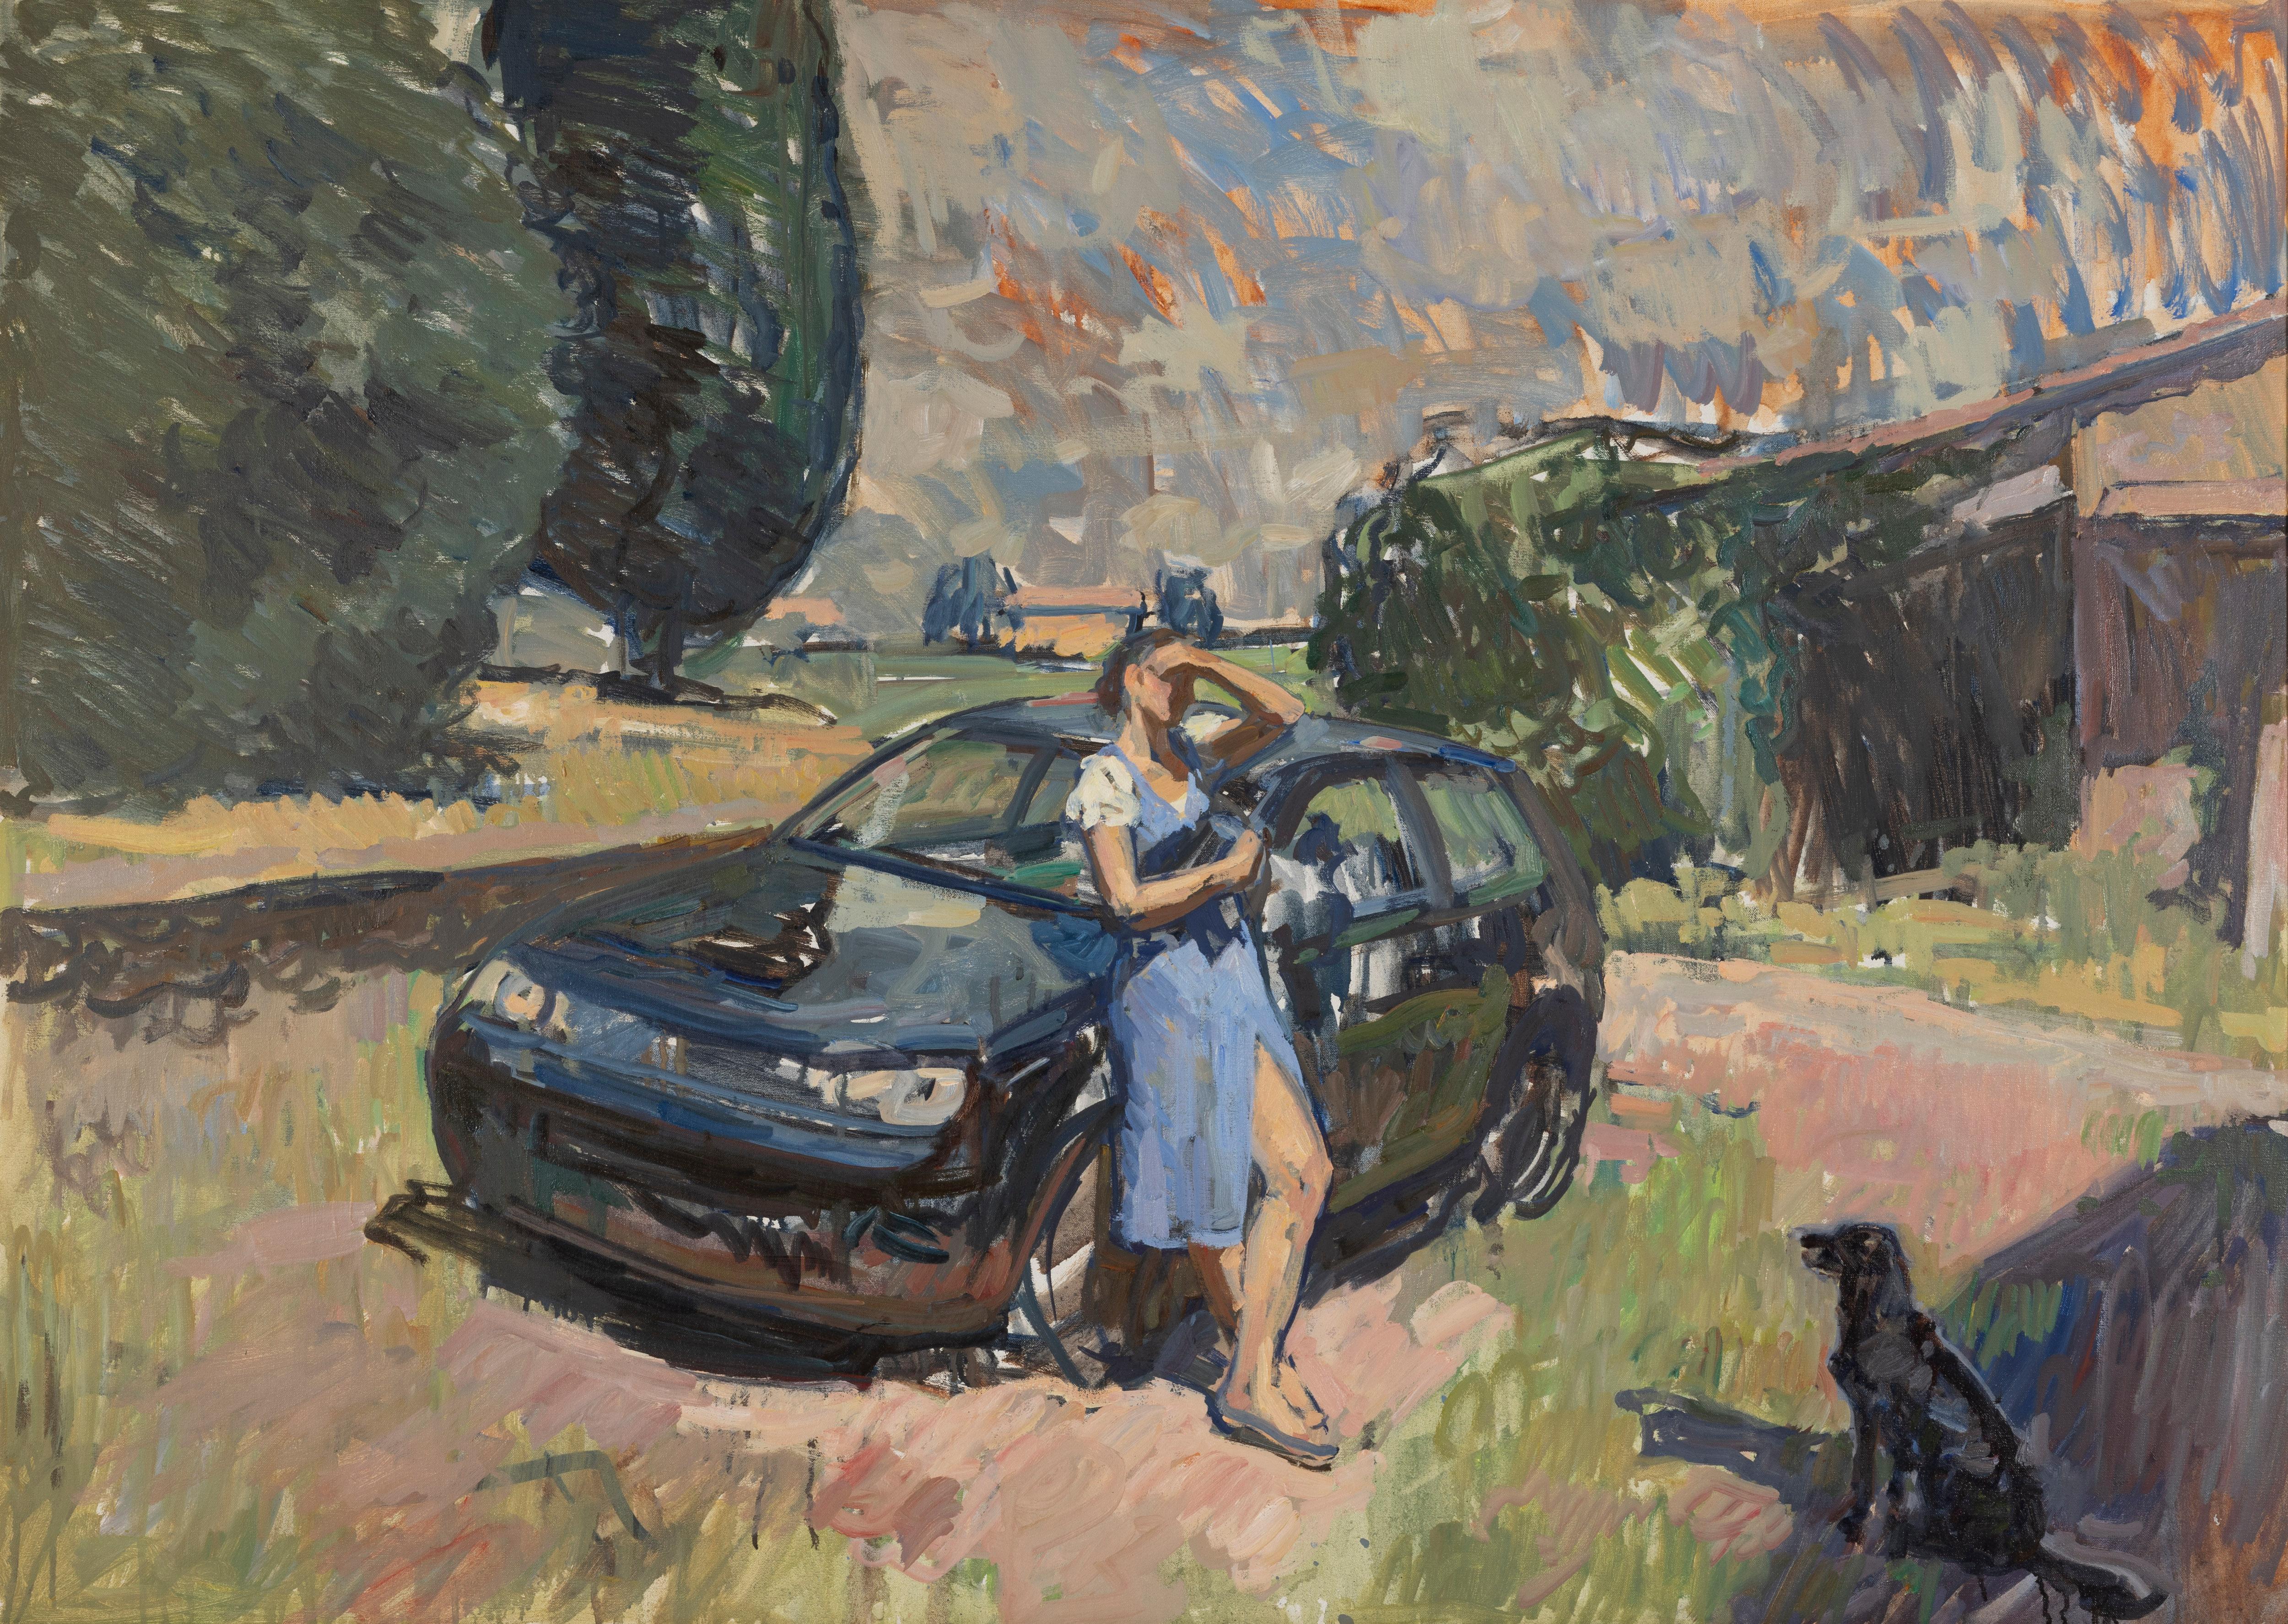 Ben Fenske Figurative Painting - "Golf" plein air oil painting, woman leaning on Fiat with dog in Tuscany, Italy